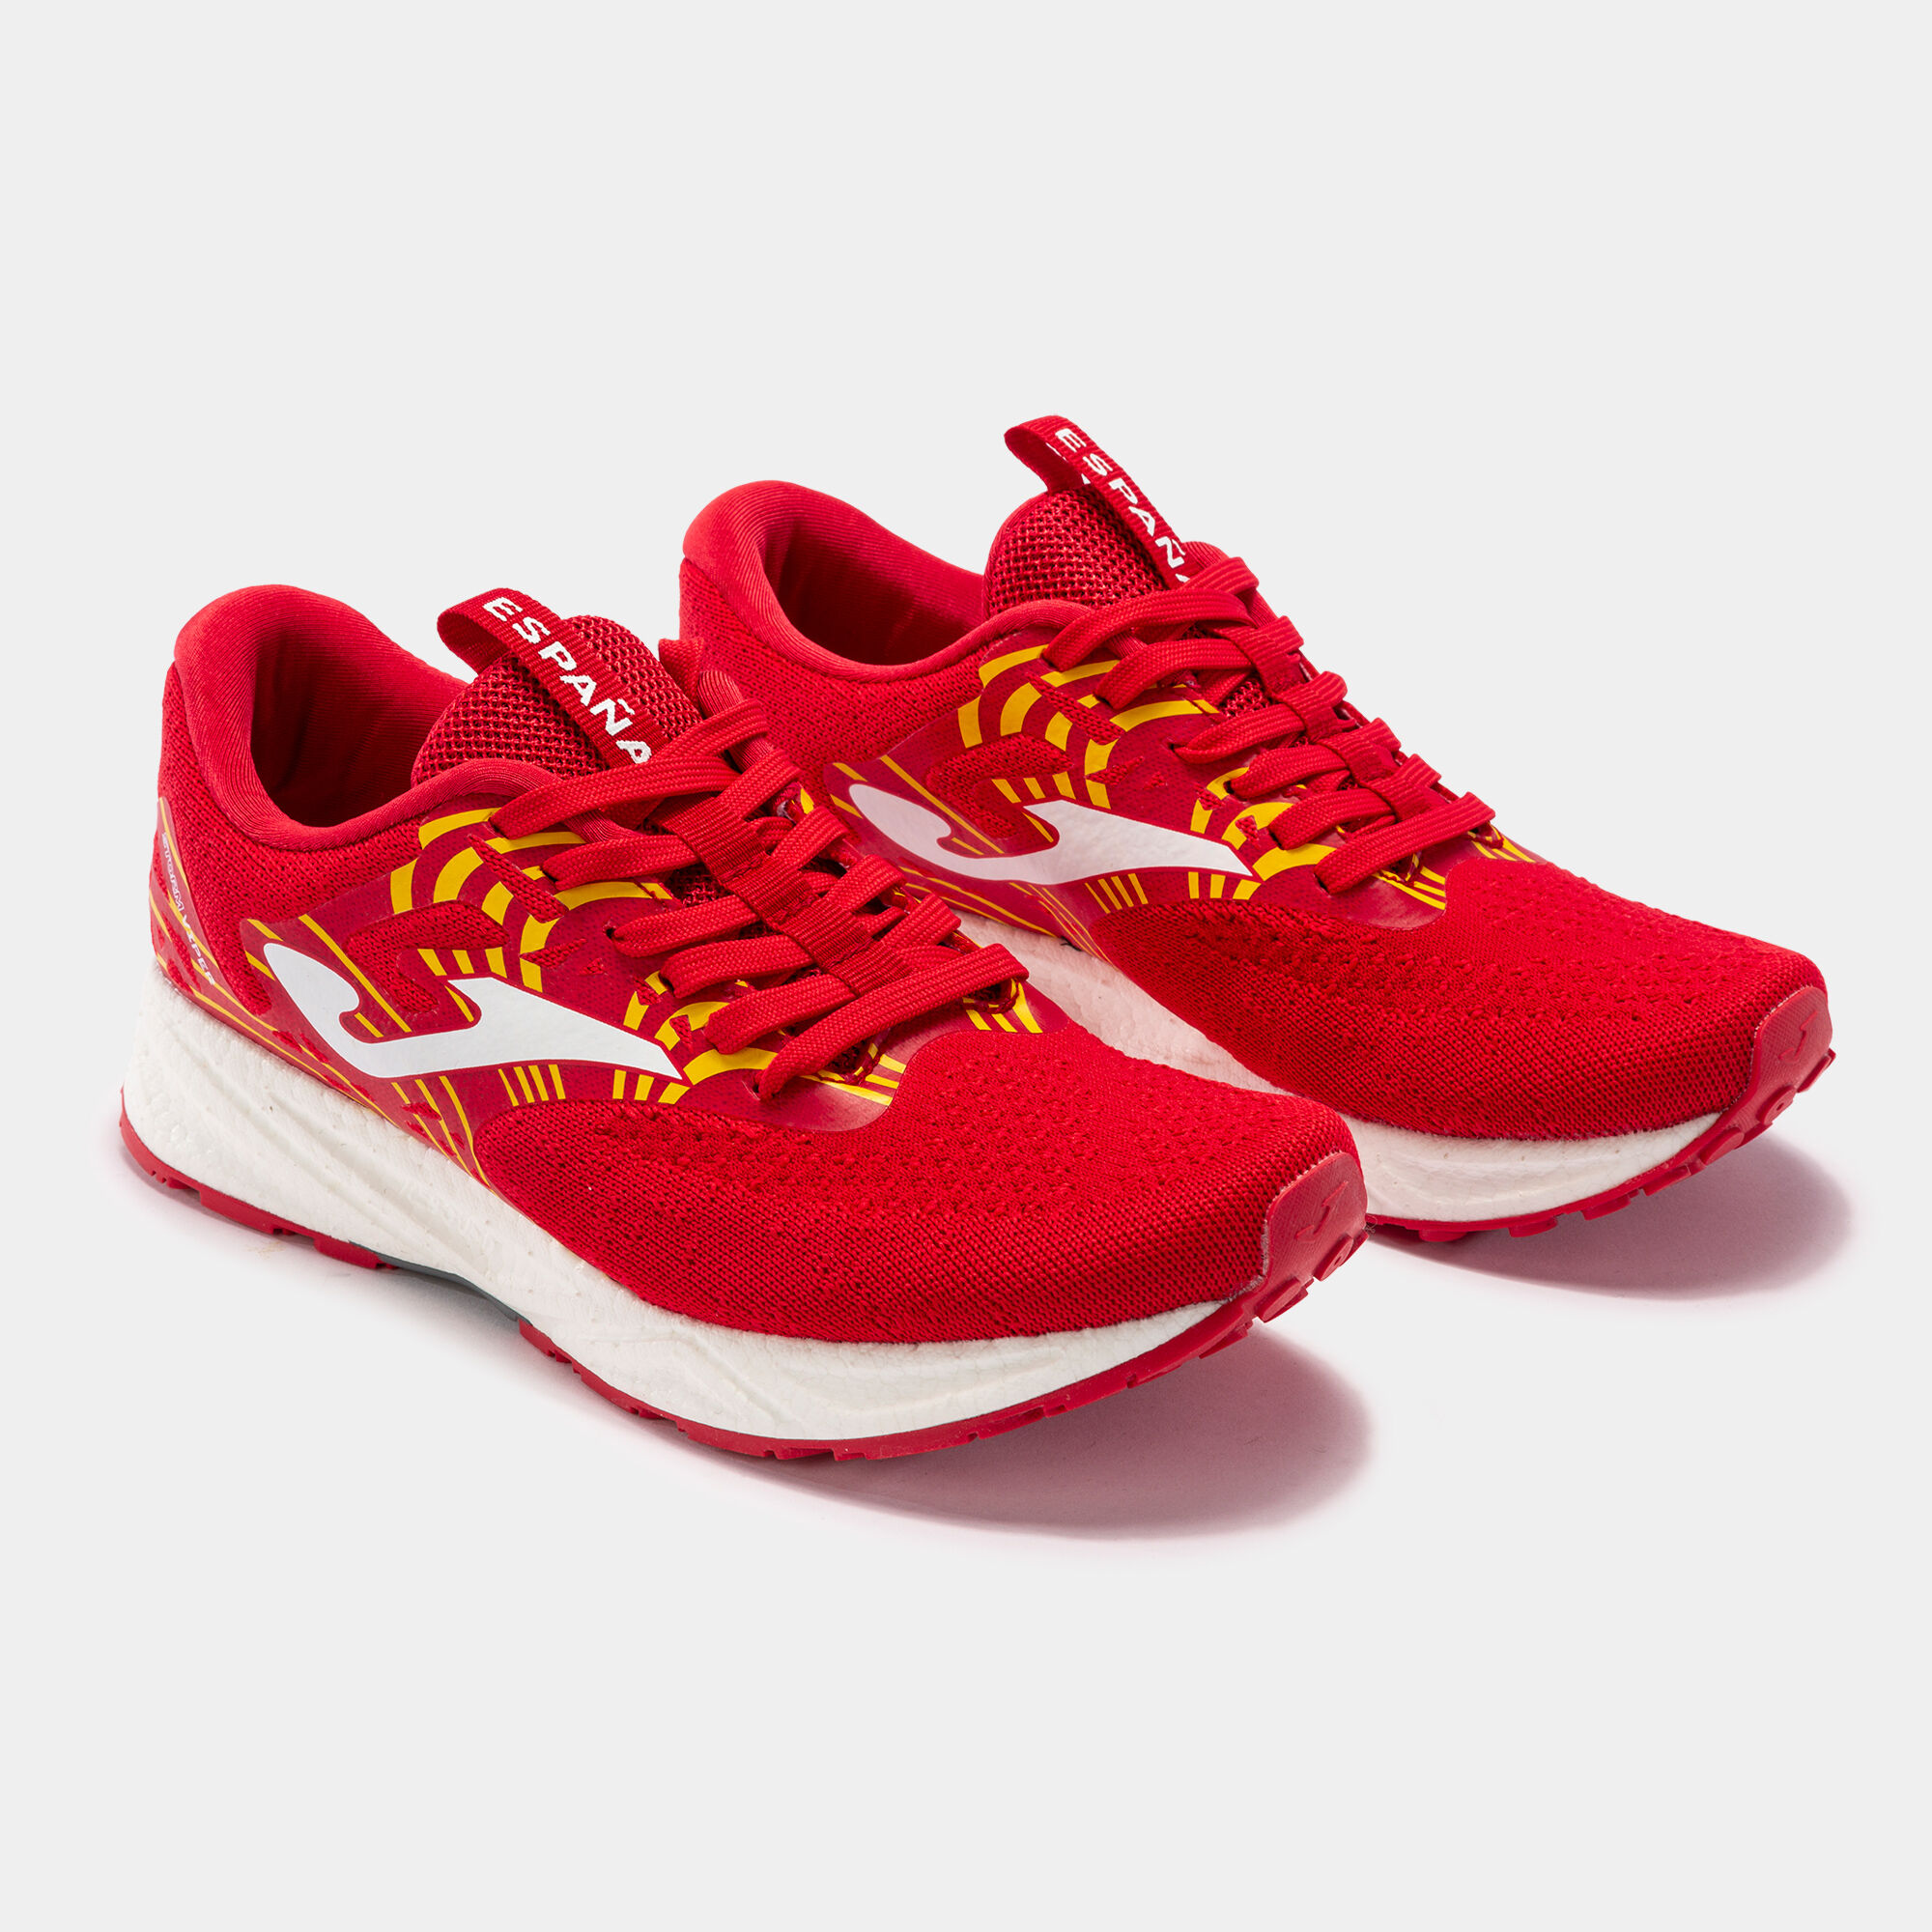 RUNNING SHOES R.VIPER LADY 22 SPAIN WOMAN RED